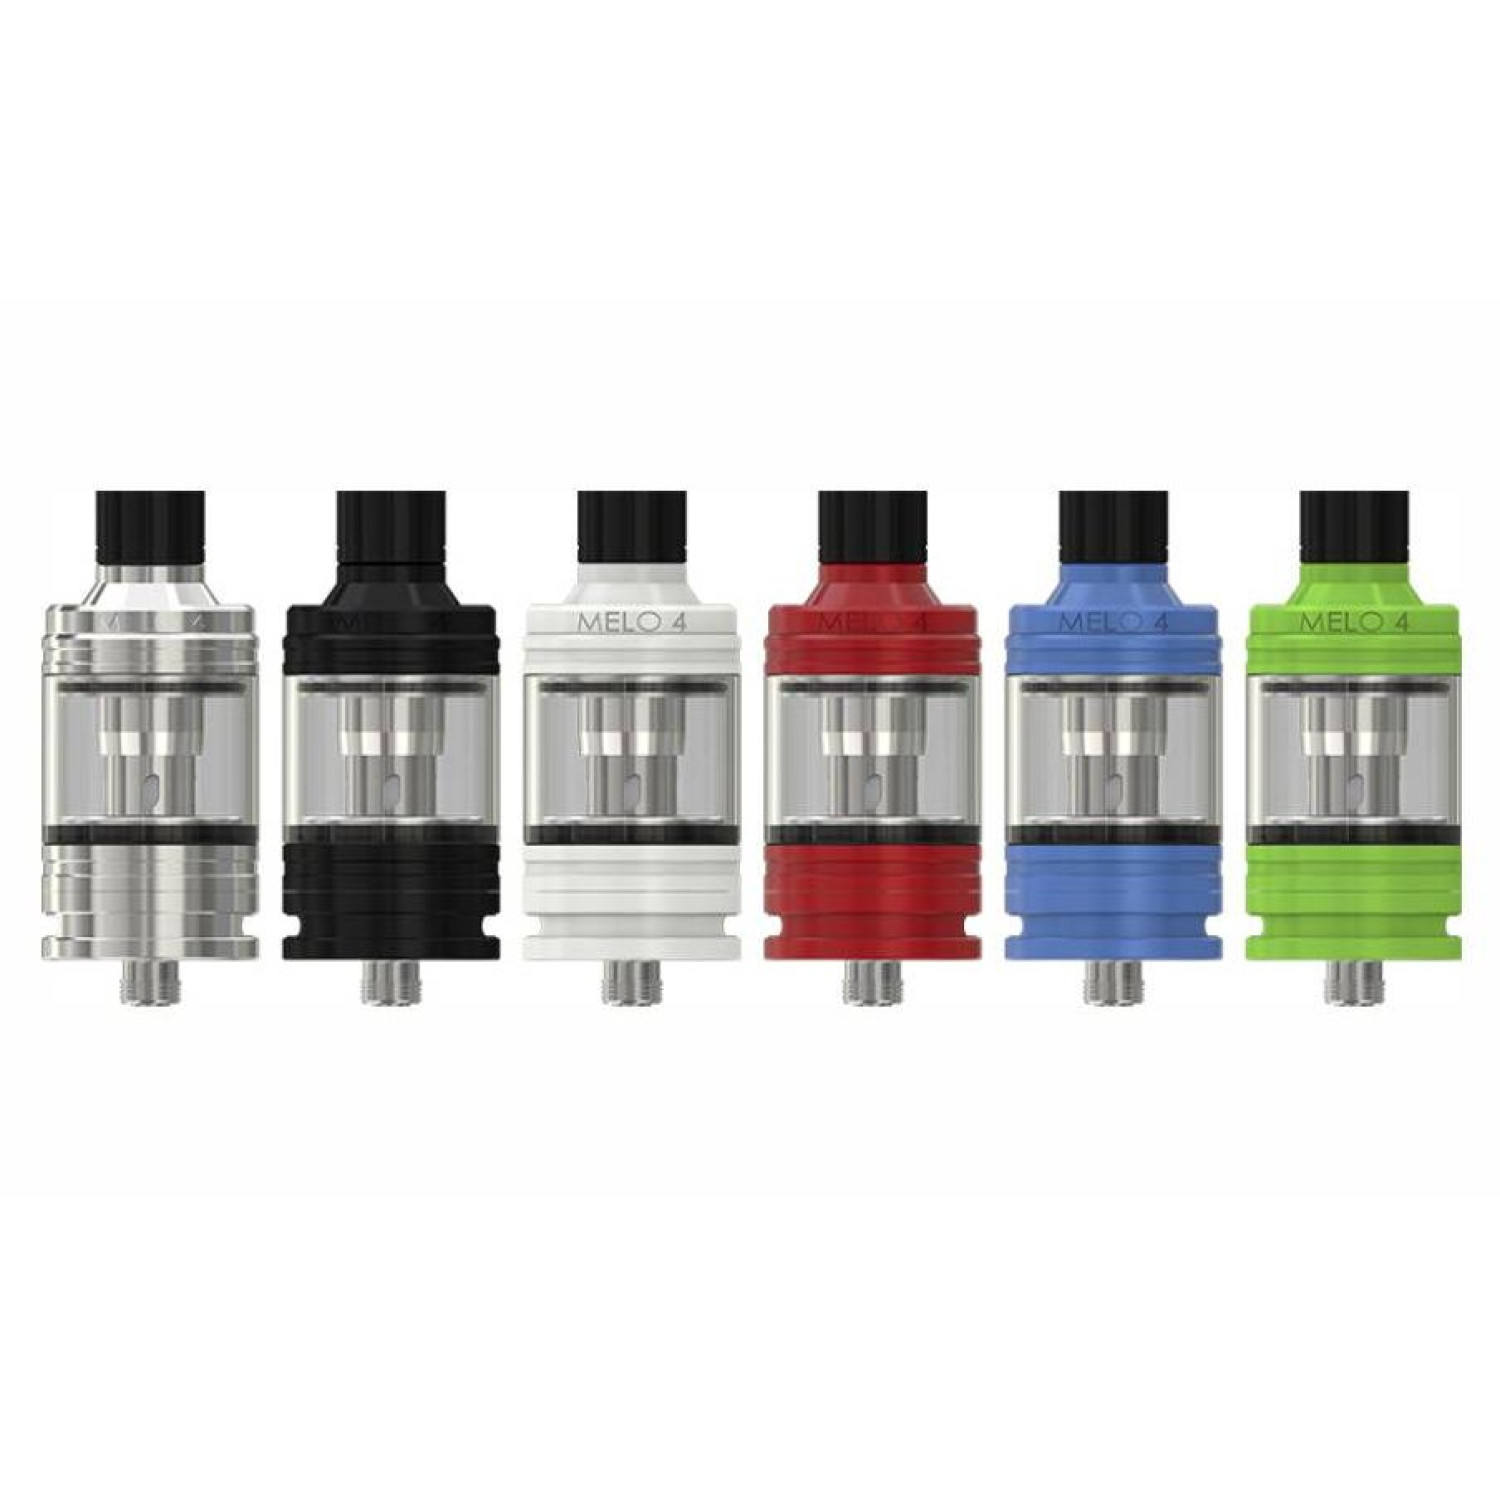 Eleaf Melo 4 D22 Clearomizer